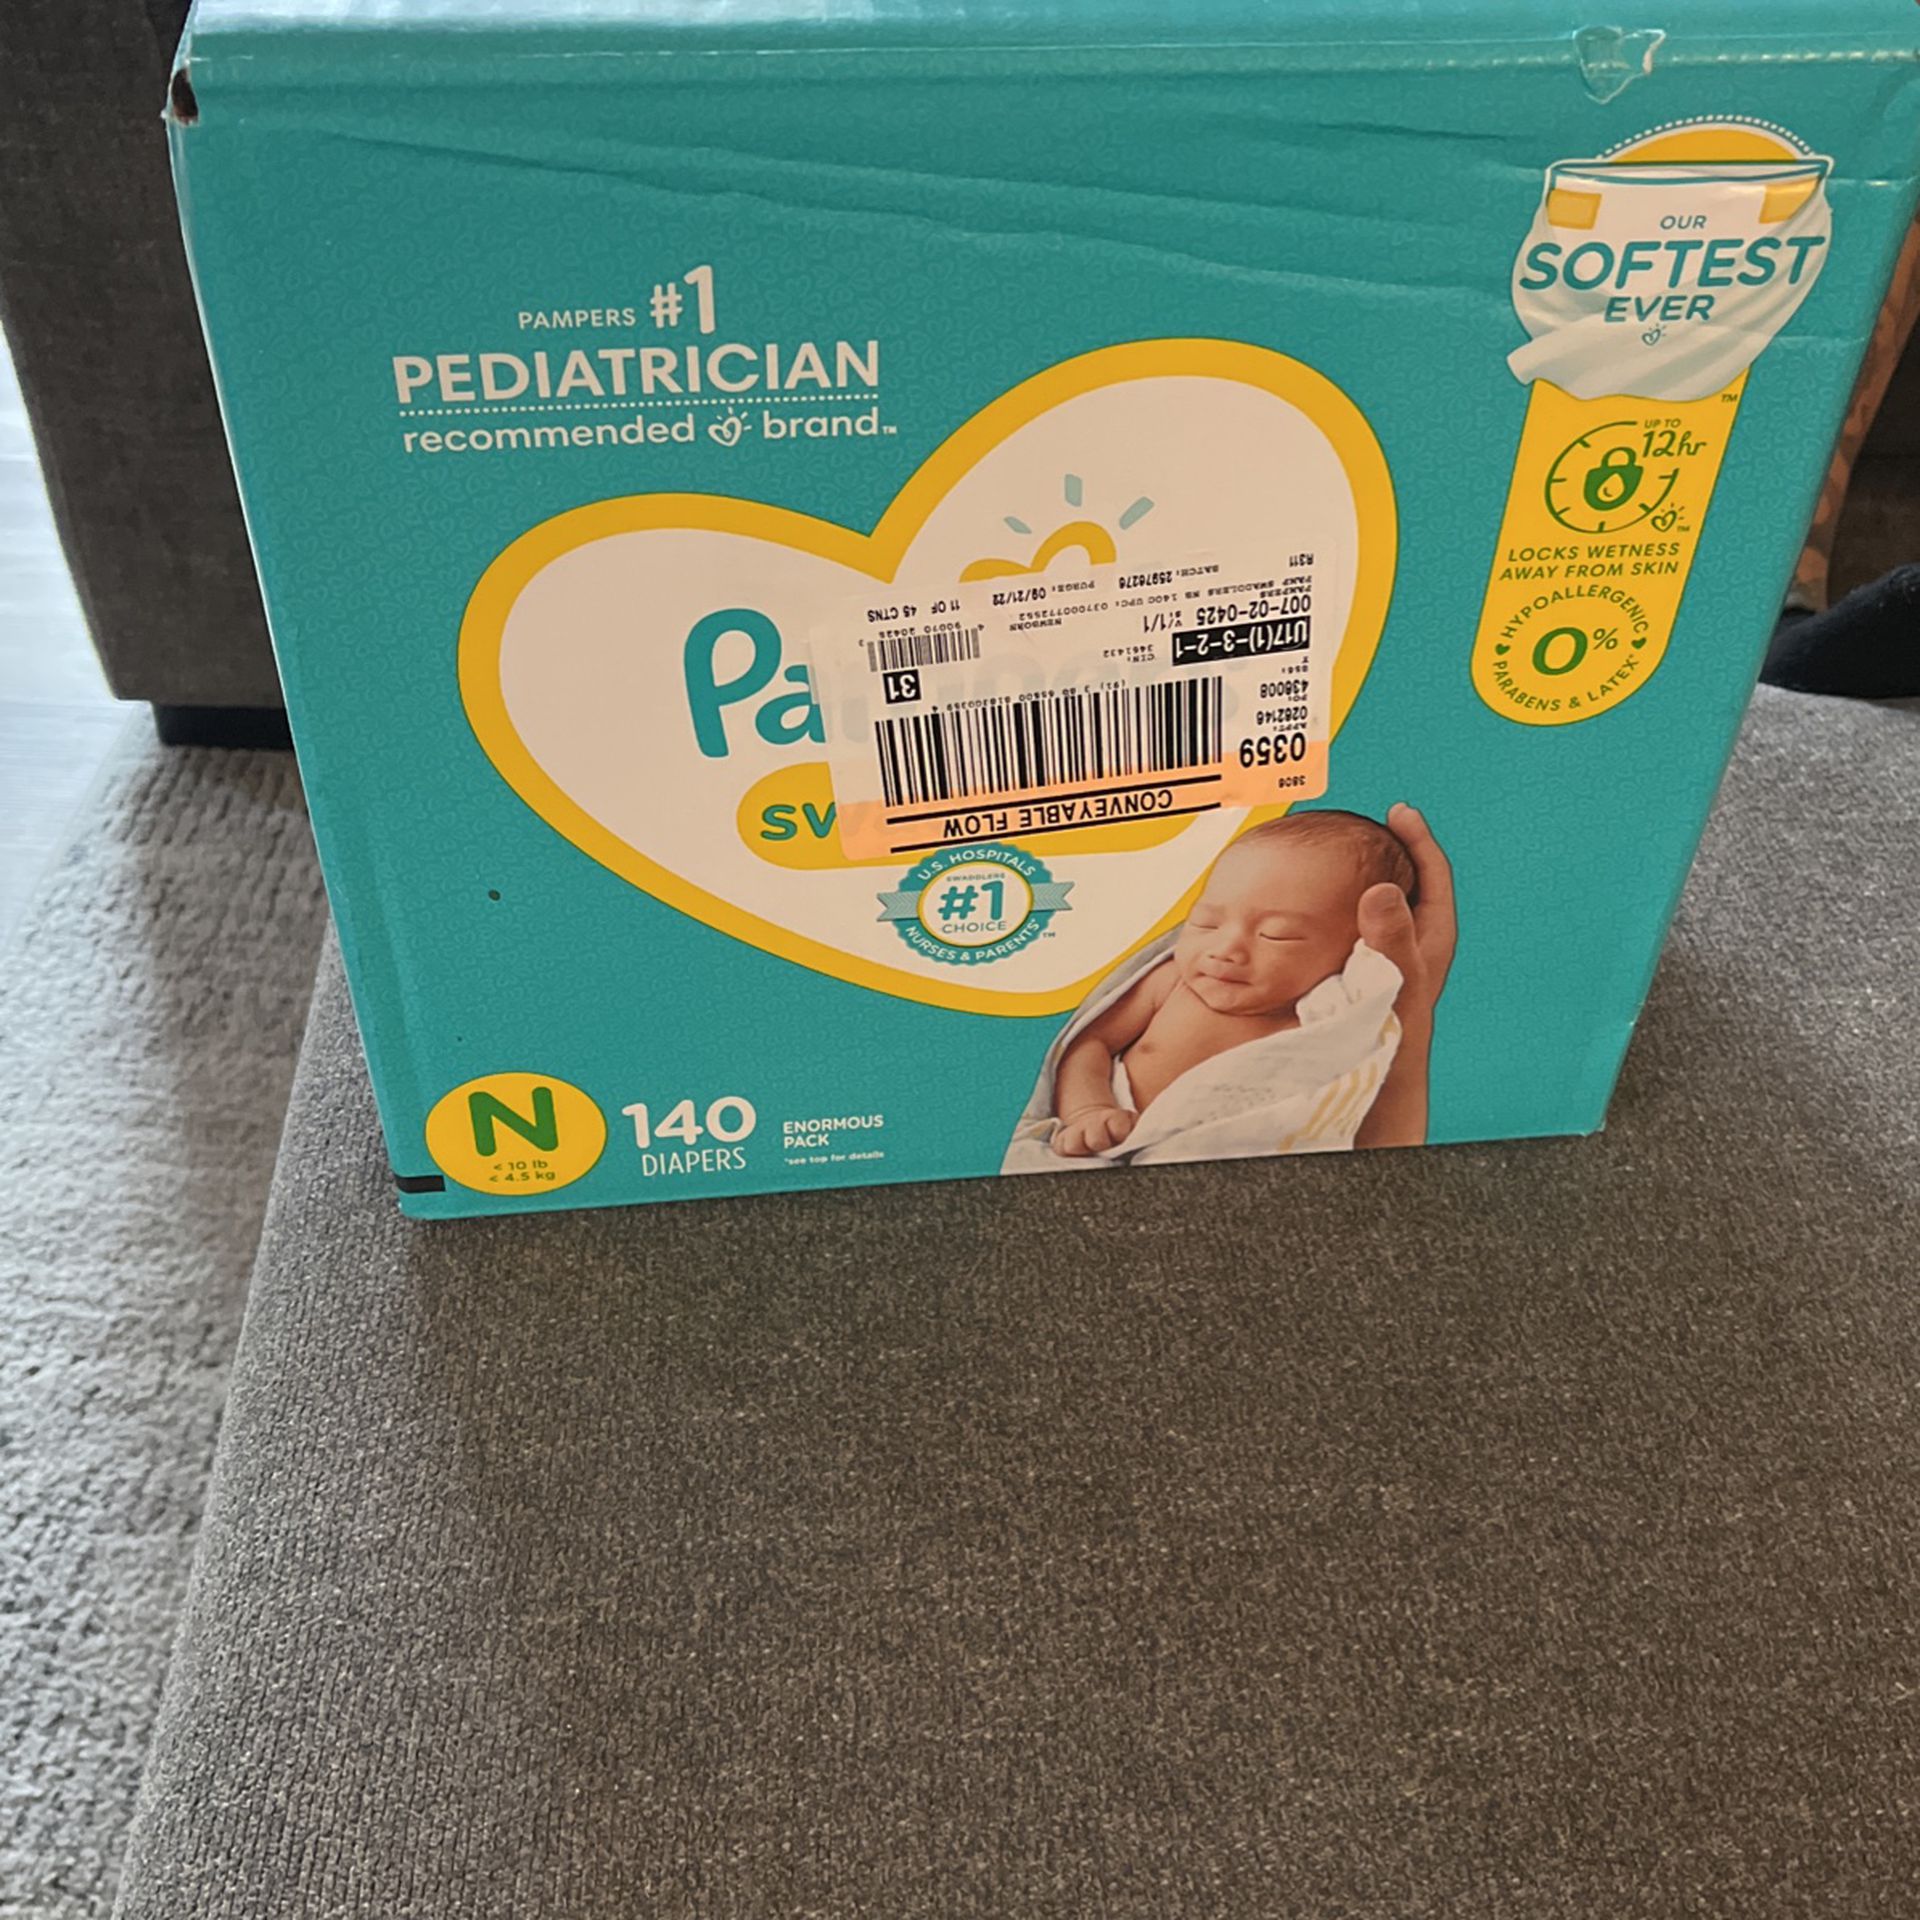 FREE!!!Brand New Never Opened Pampers Newborn Size Diapers